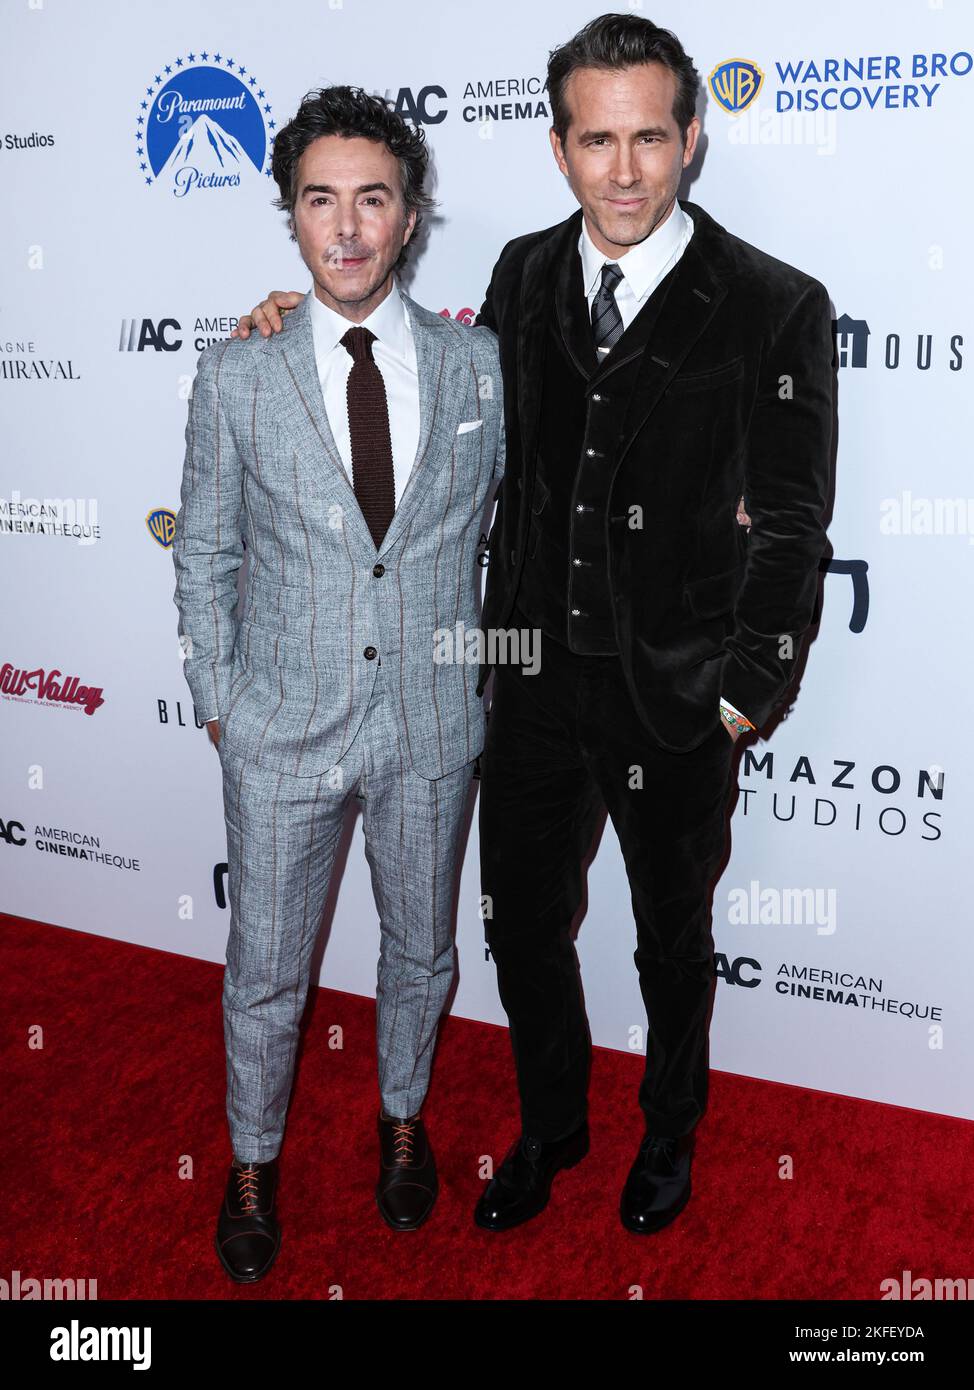 Beverly Hills, United States. 17th Nov, 2022. BEVERLY HILLS, LOS ANGELES, CALIFORNIA, USA - NOVEMBER 17: Canadian director Shawn Levy and Canadian-American actor Ryan Reynolds arrive at the 36th Annual American Cinematheque Awards Honoring Ryan Reynolds held at The Beverly Hilton Hotel on November 17, 2022 in Beverly Hills, Los Angeles, California, United States. (Photo by Xavier Collin/Image Press Agency) Credit: Image Press Agency/Alamy Live News Stock Photo